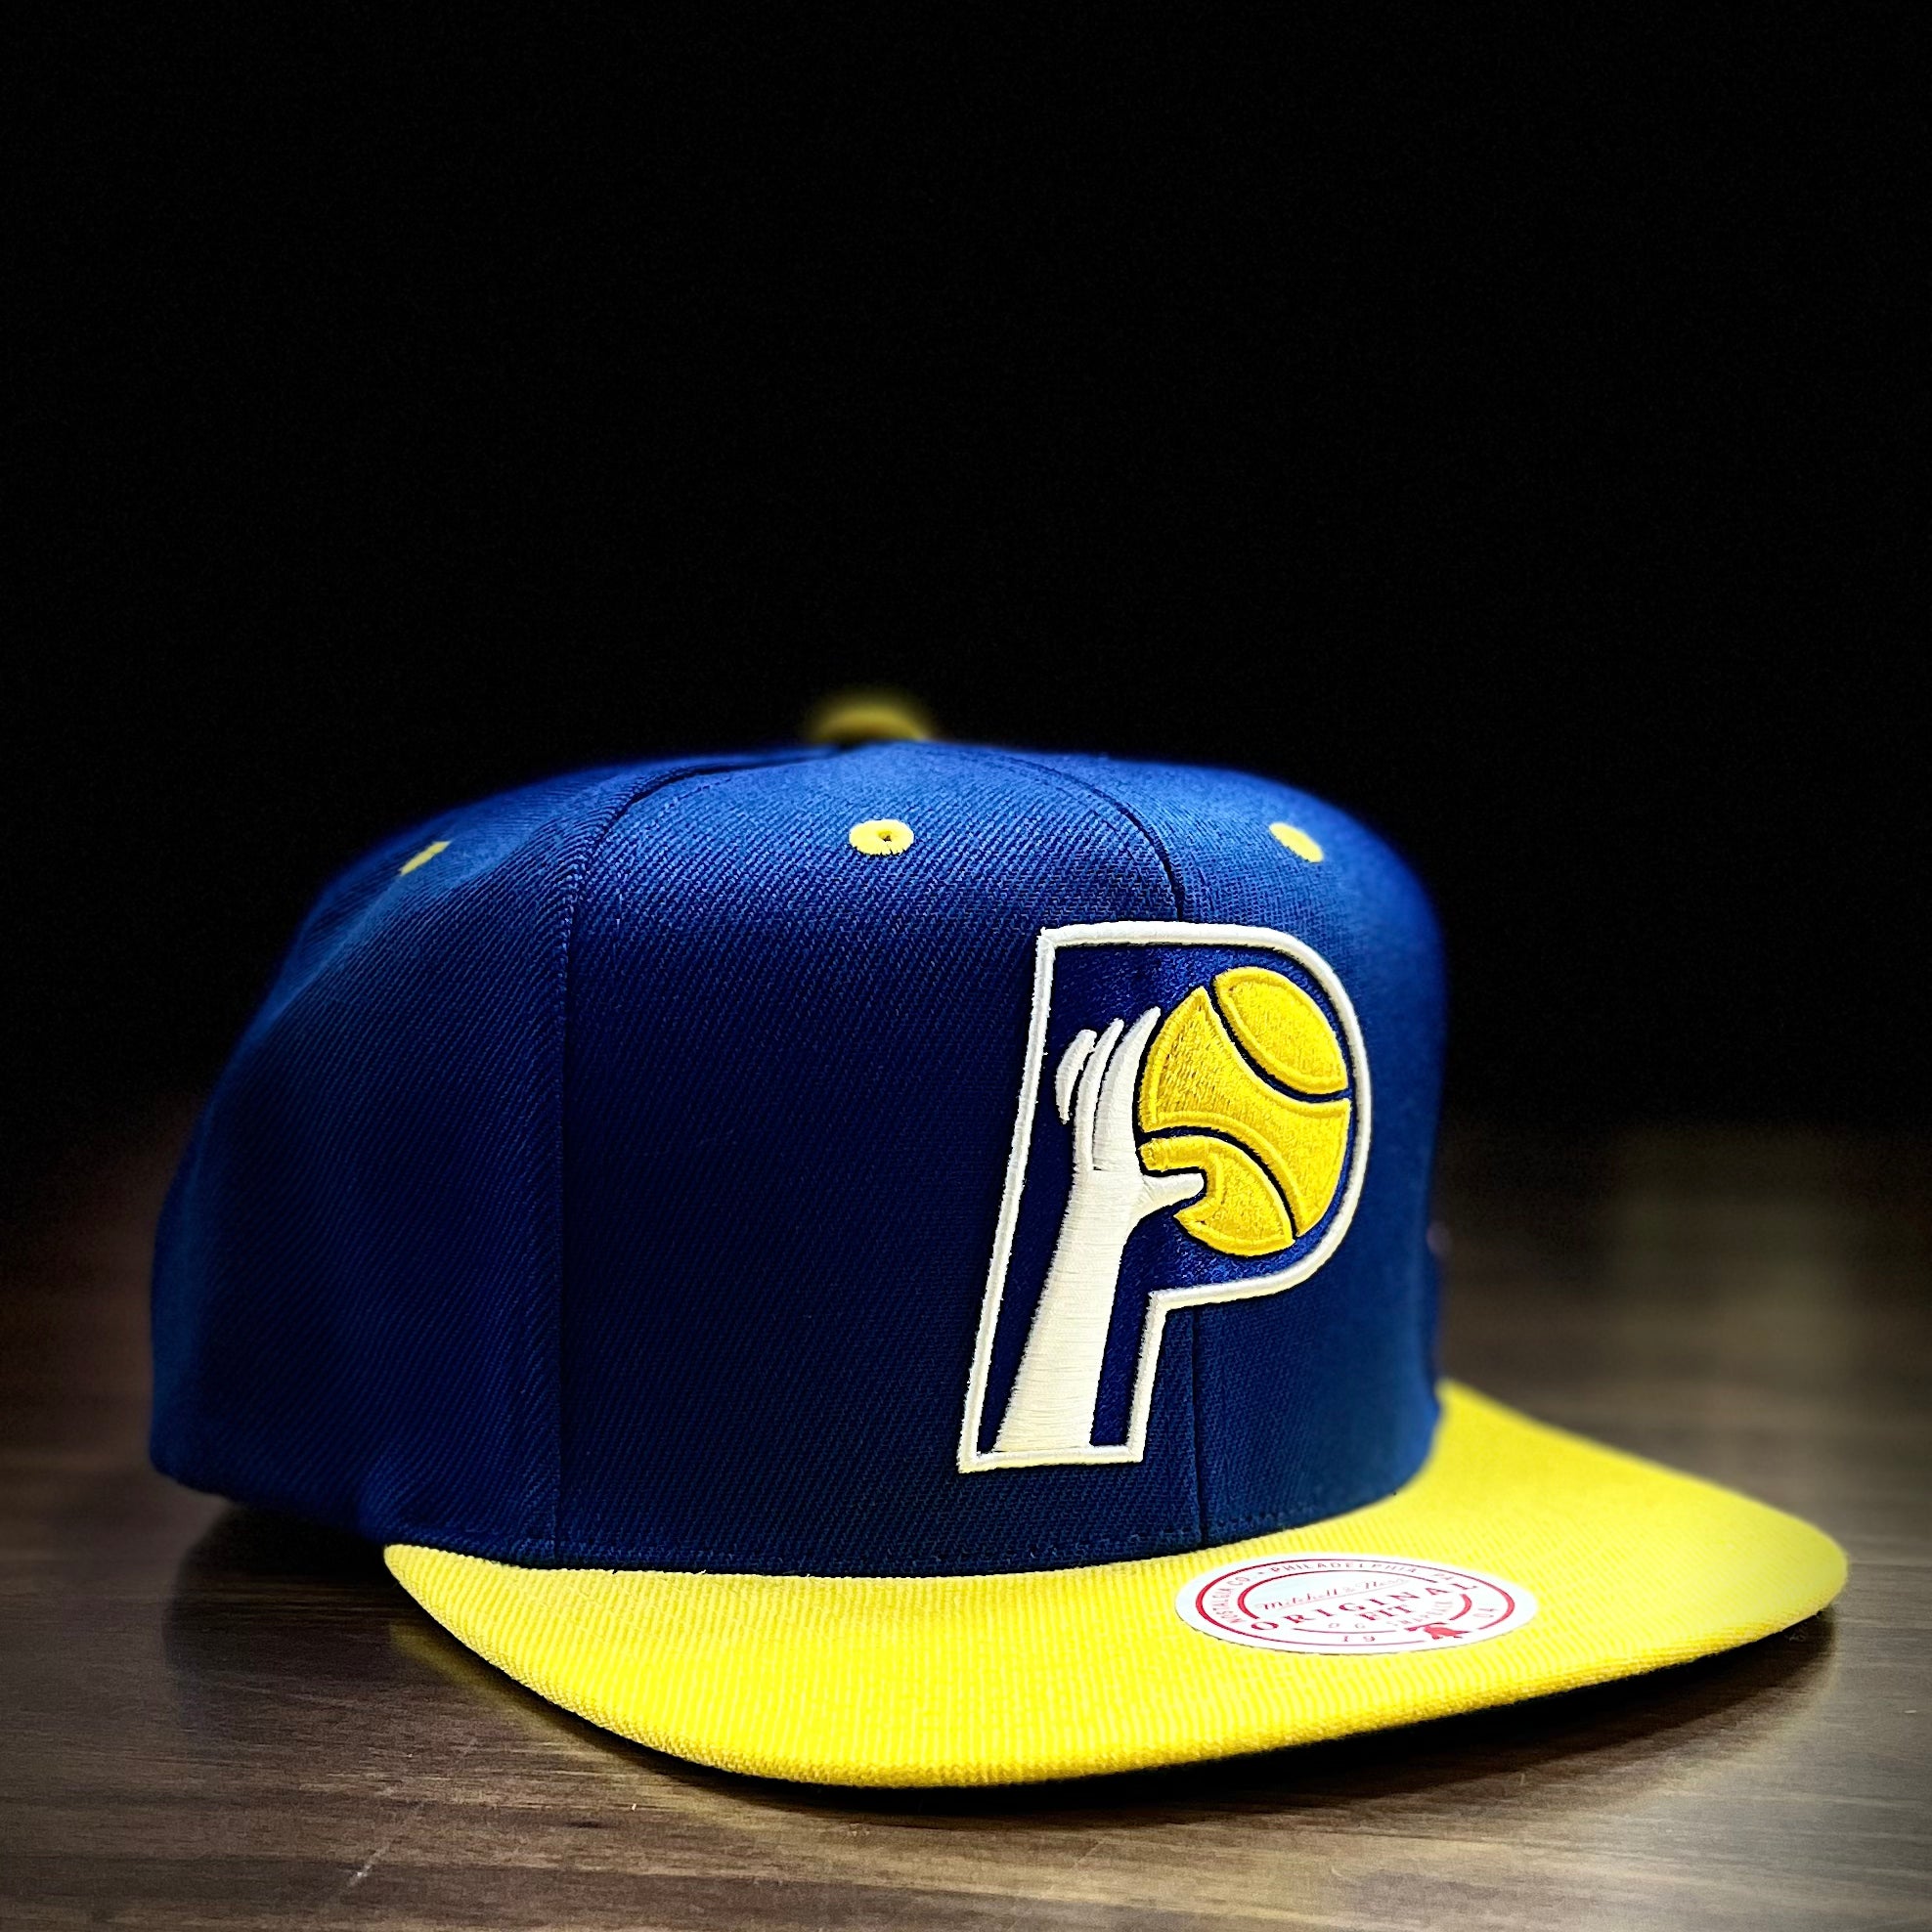 Indiana Pacers Mitchell & Ness Snapback Cap With Tags for sale online